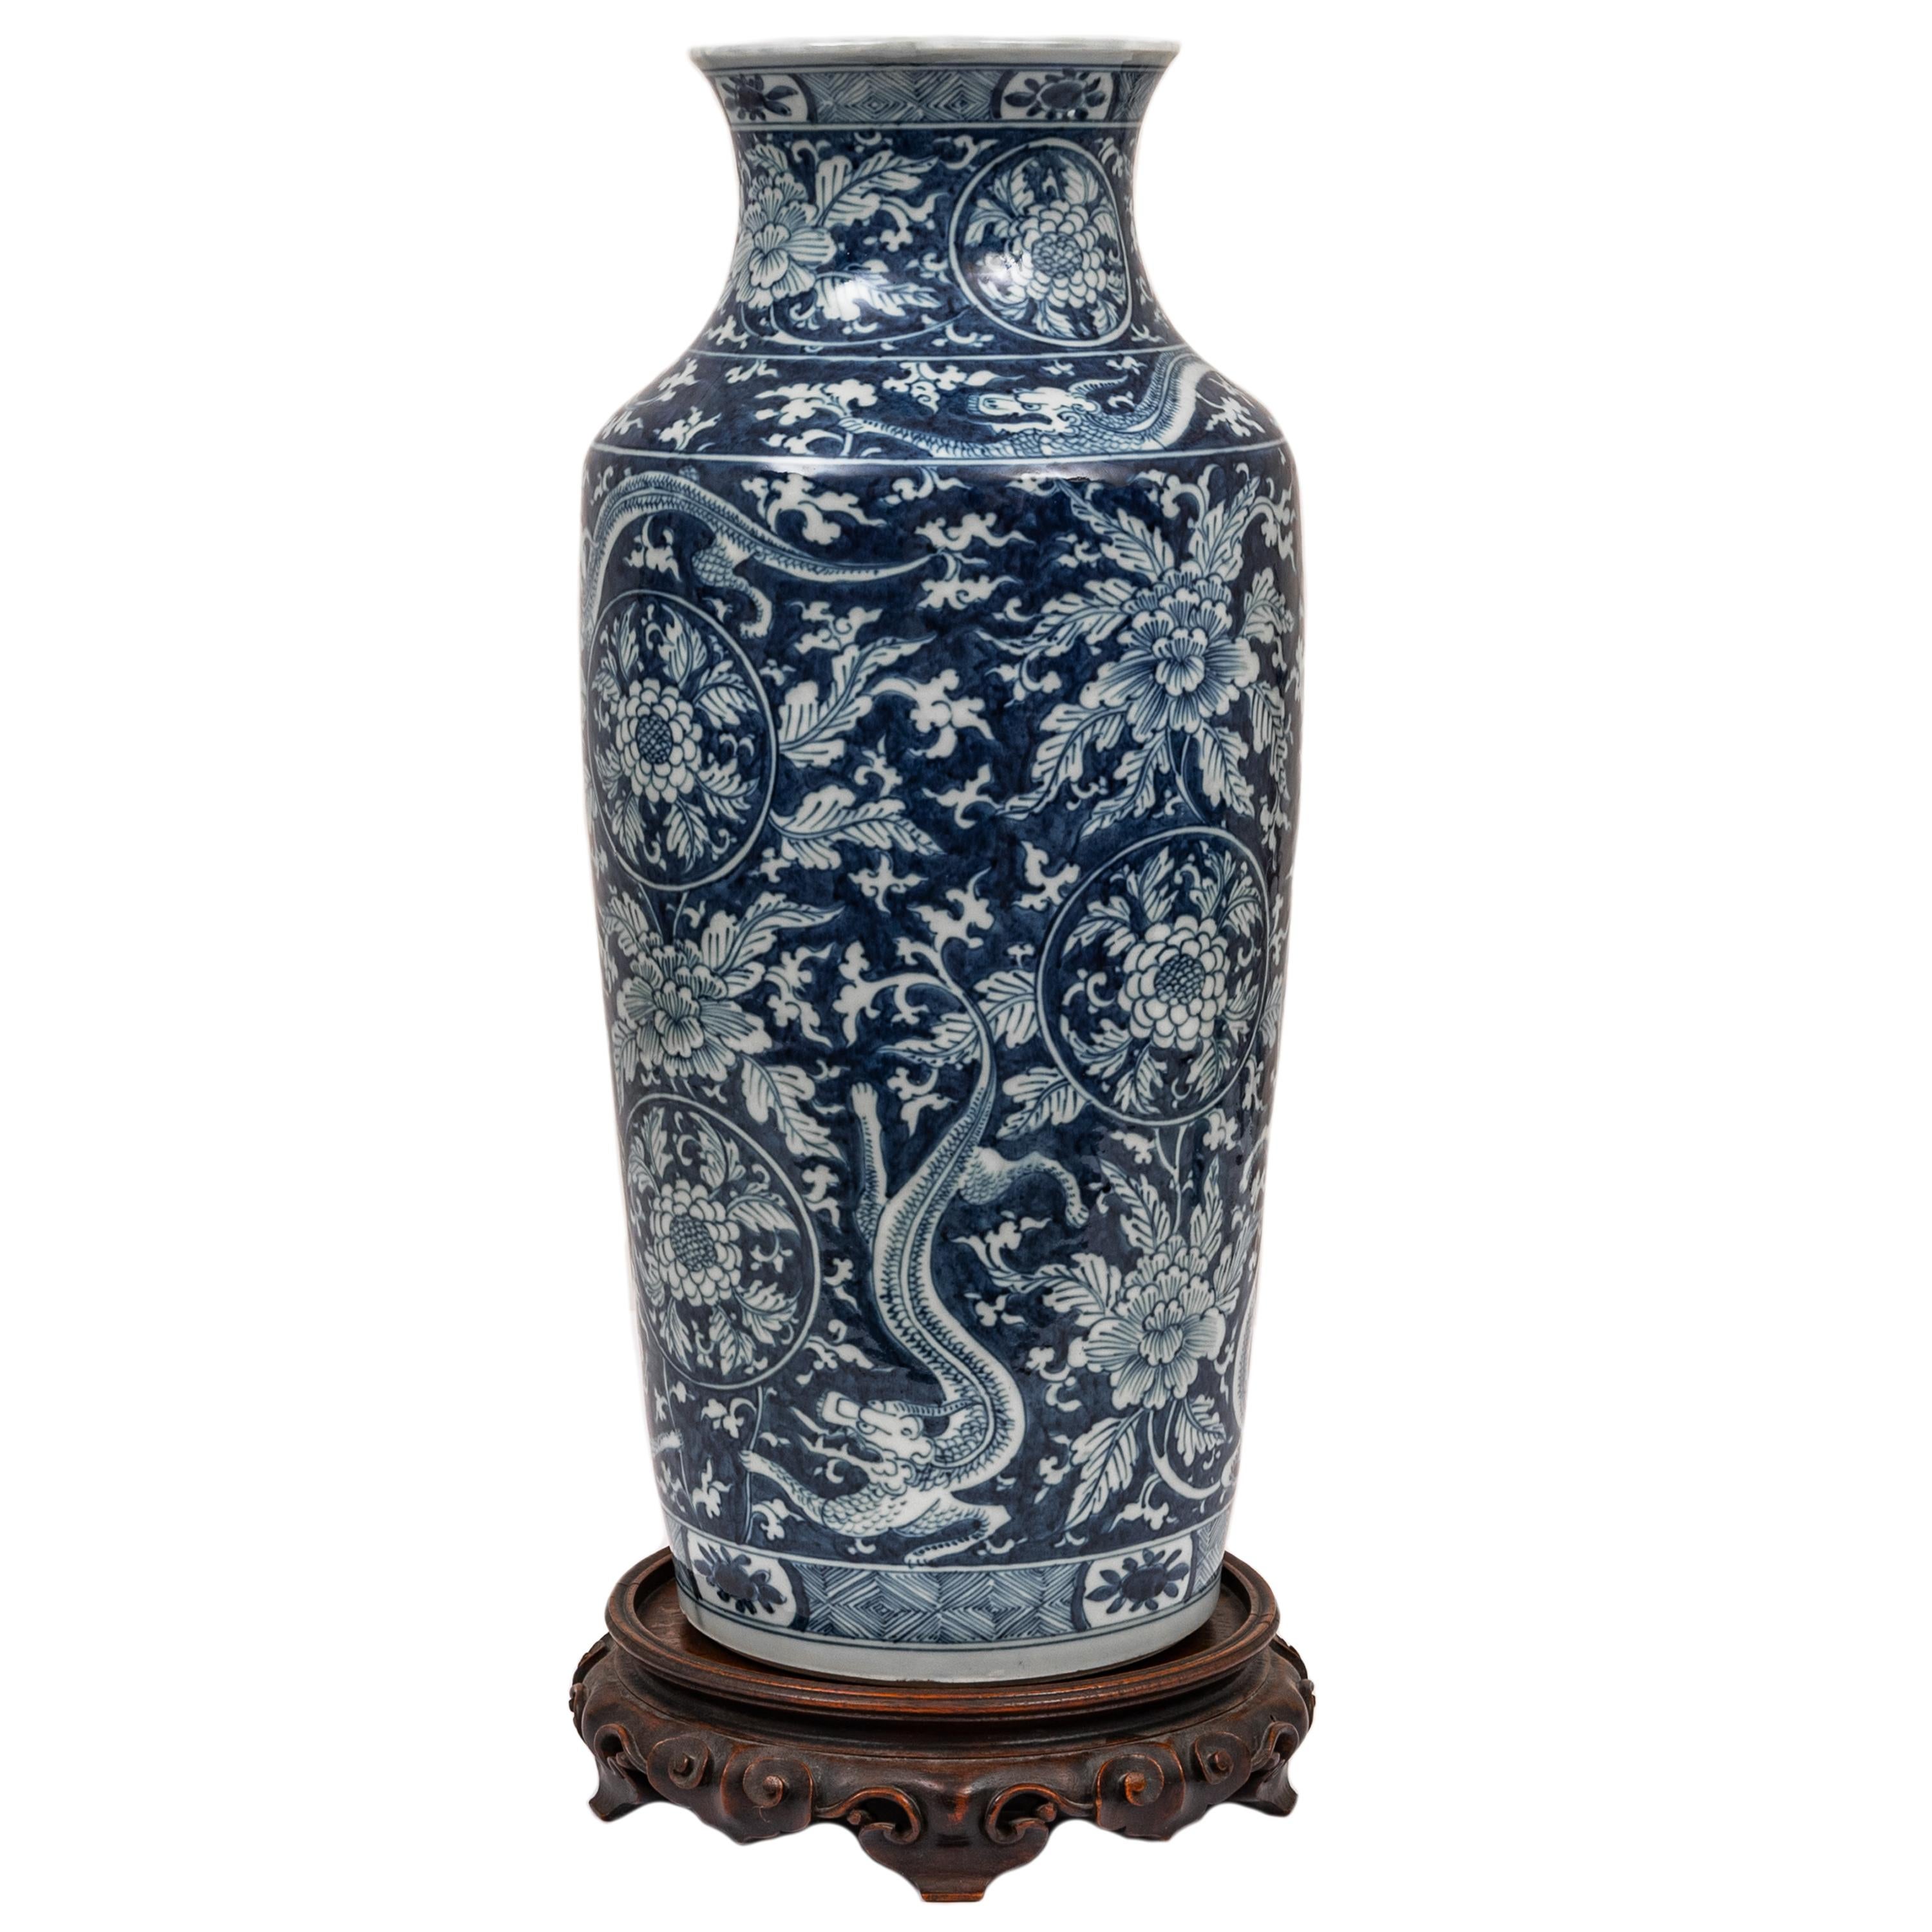 Late 17th Century Antique Blue White Chinese Porcelain Qing Dynasty Kangxi Period Dragon Vase 1680 For Sale